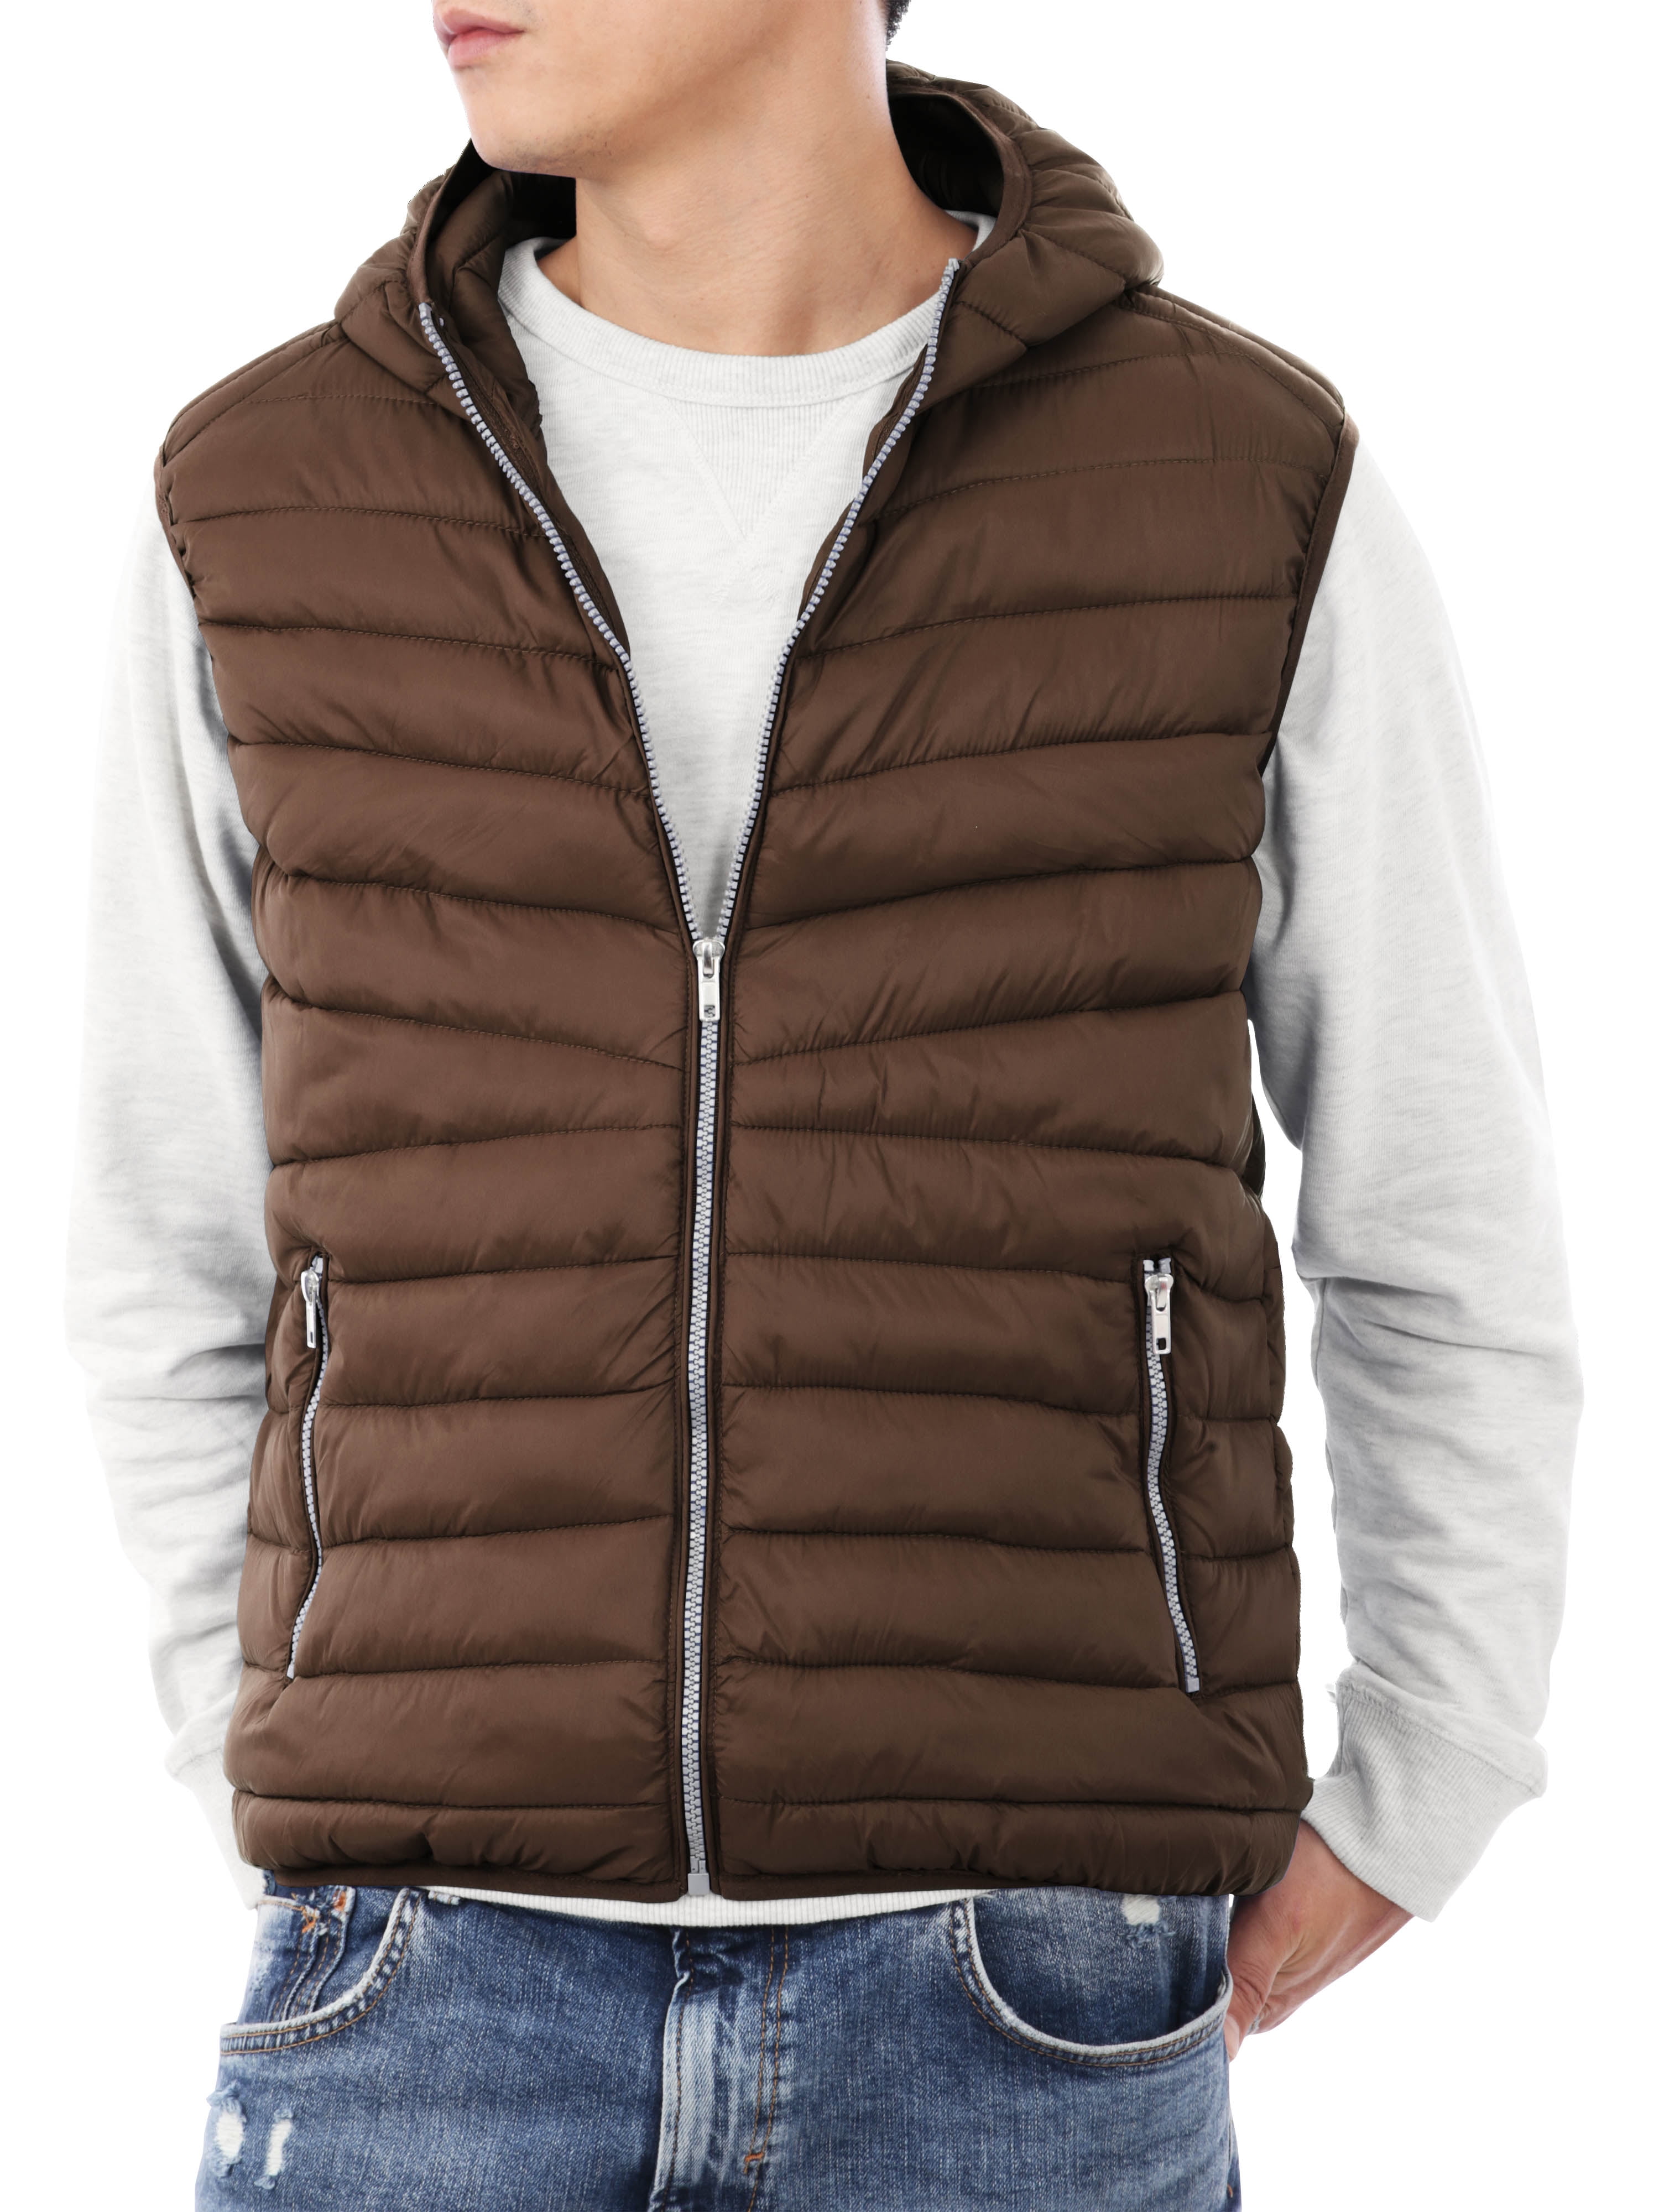 Mens quilted vest